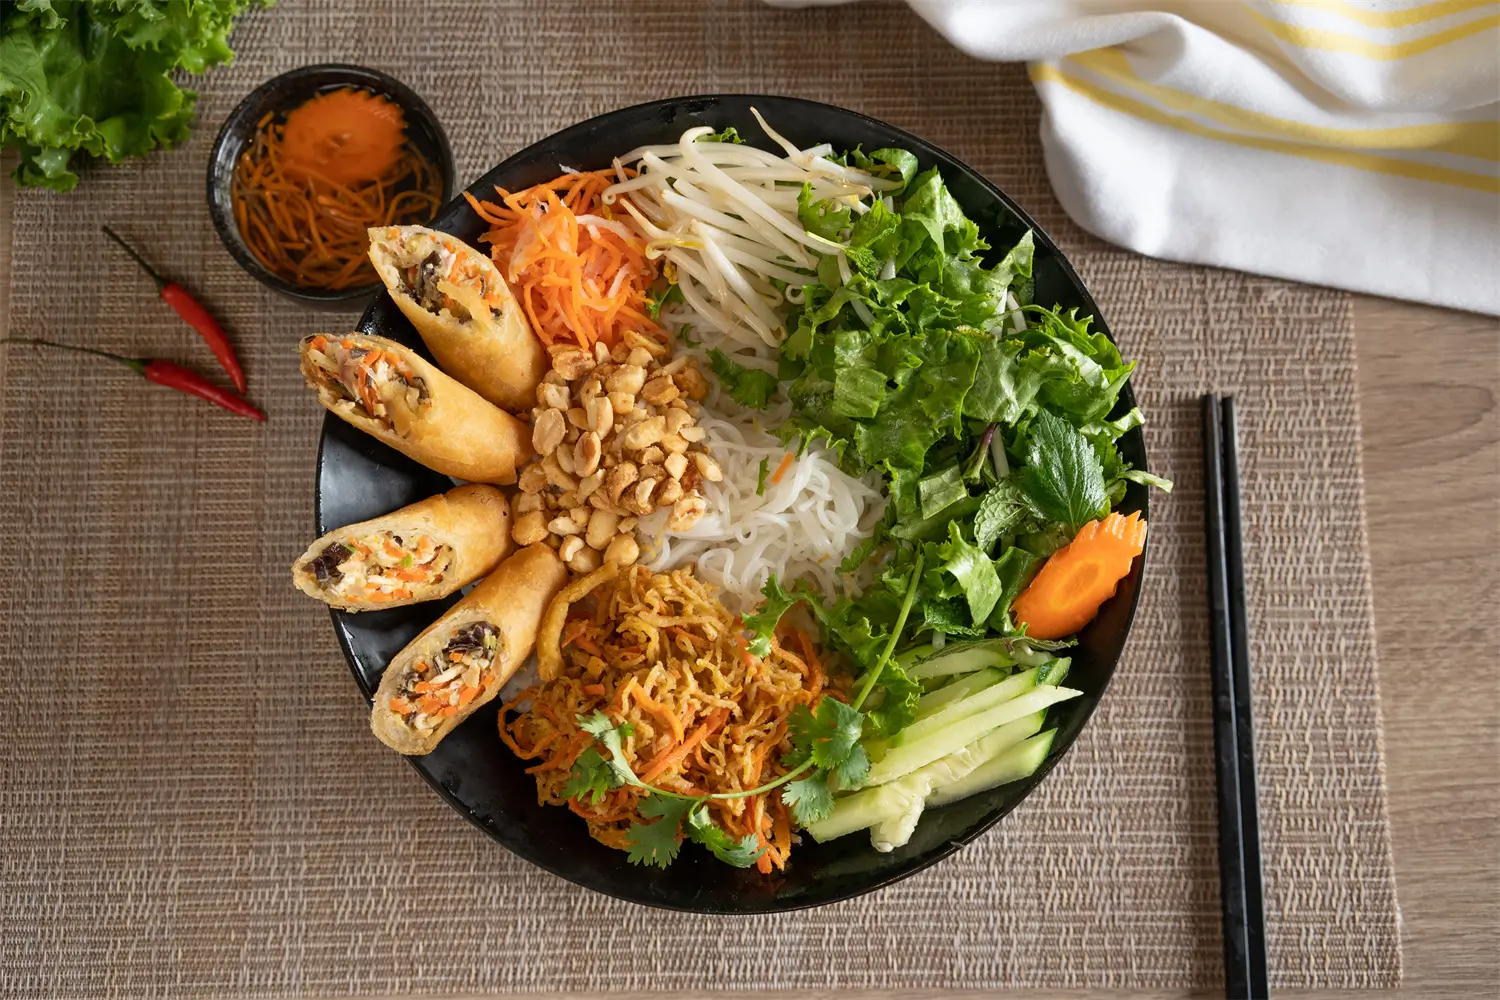 Vermicelli with Egg Rolls and Shredded Pork